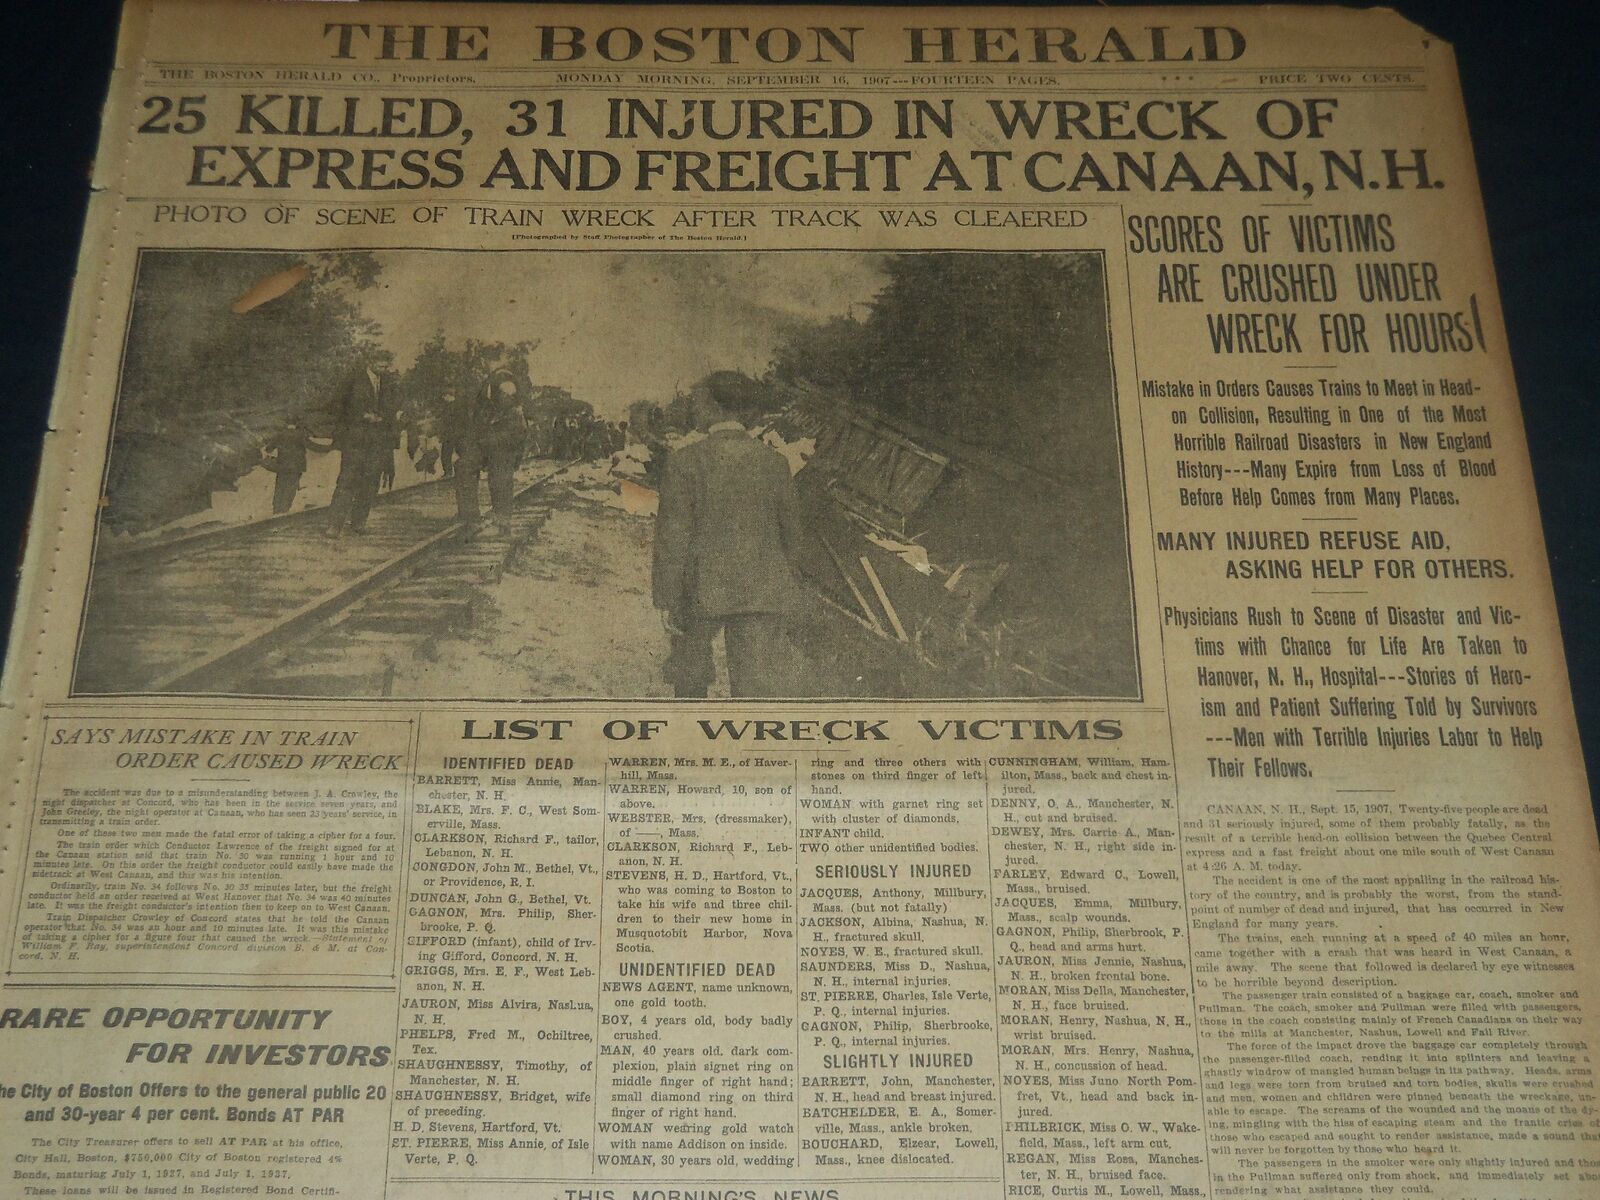 1907 SEPT 16 THE BOSTON HERALD - 25 KILLED IN TRAIN WRECK AT CANAAN - BH 239